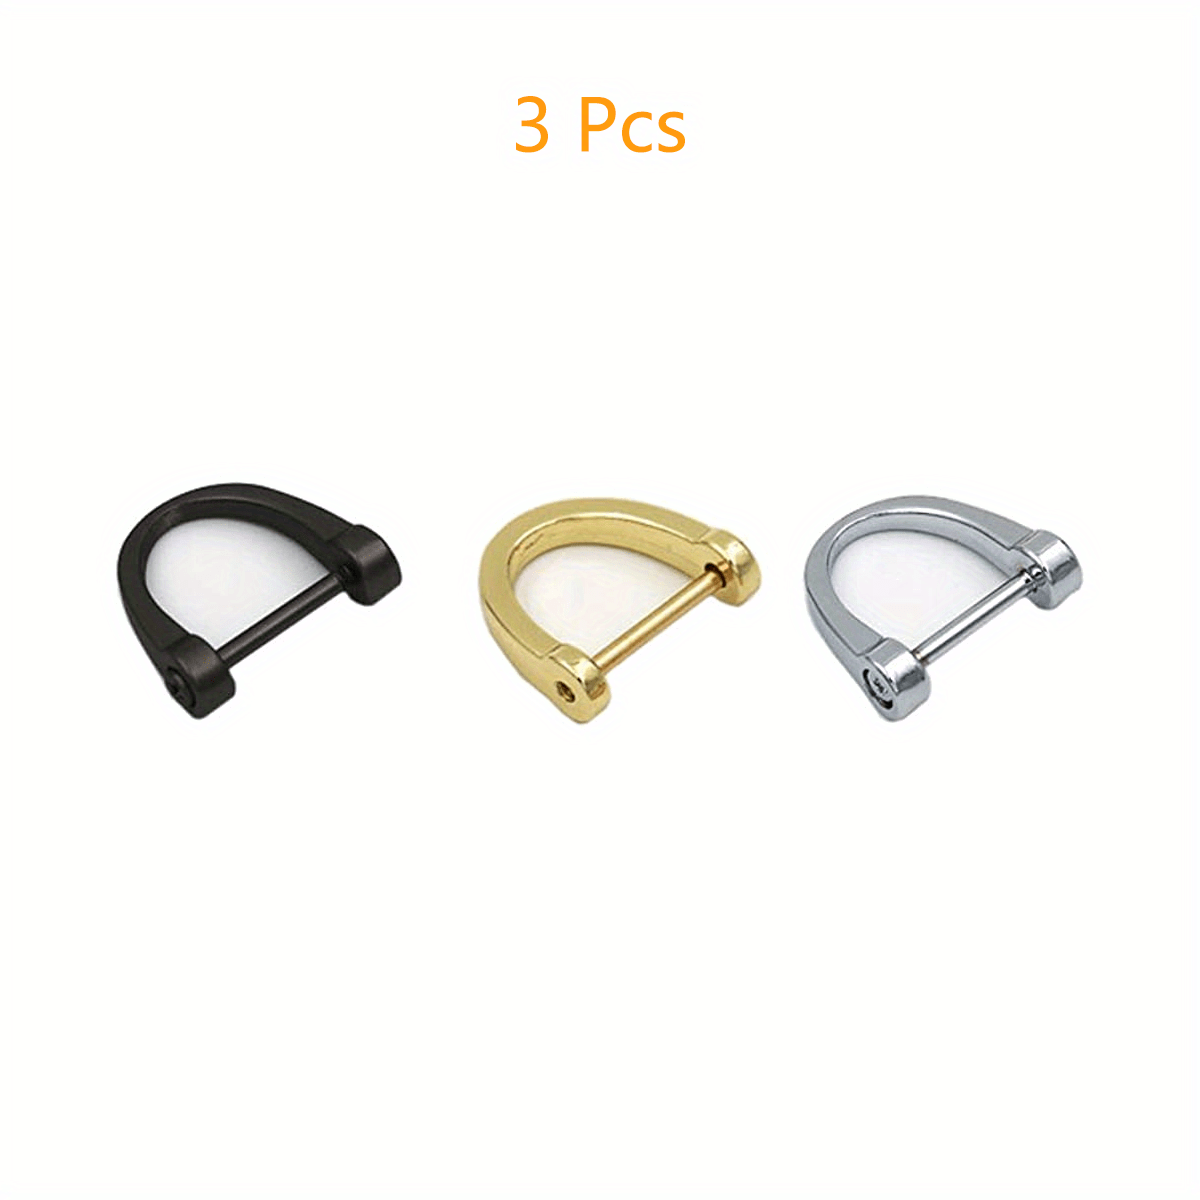  Gold D Rings for Purses,D-Ring with Screw for